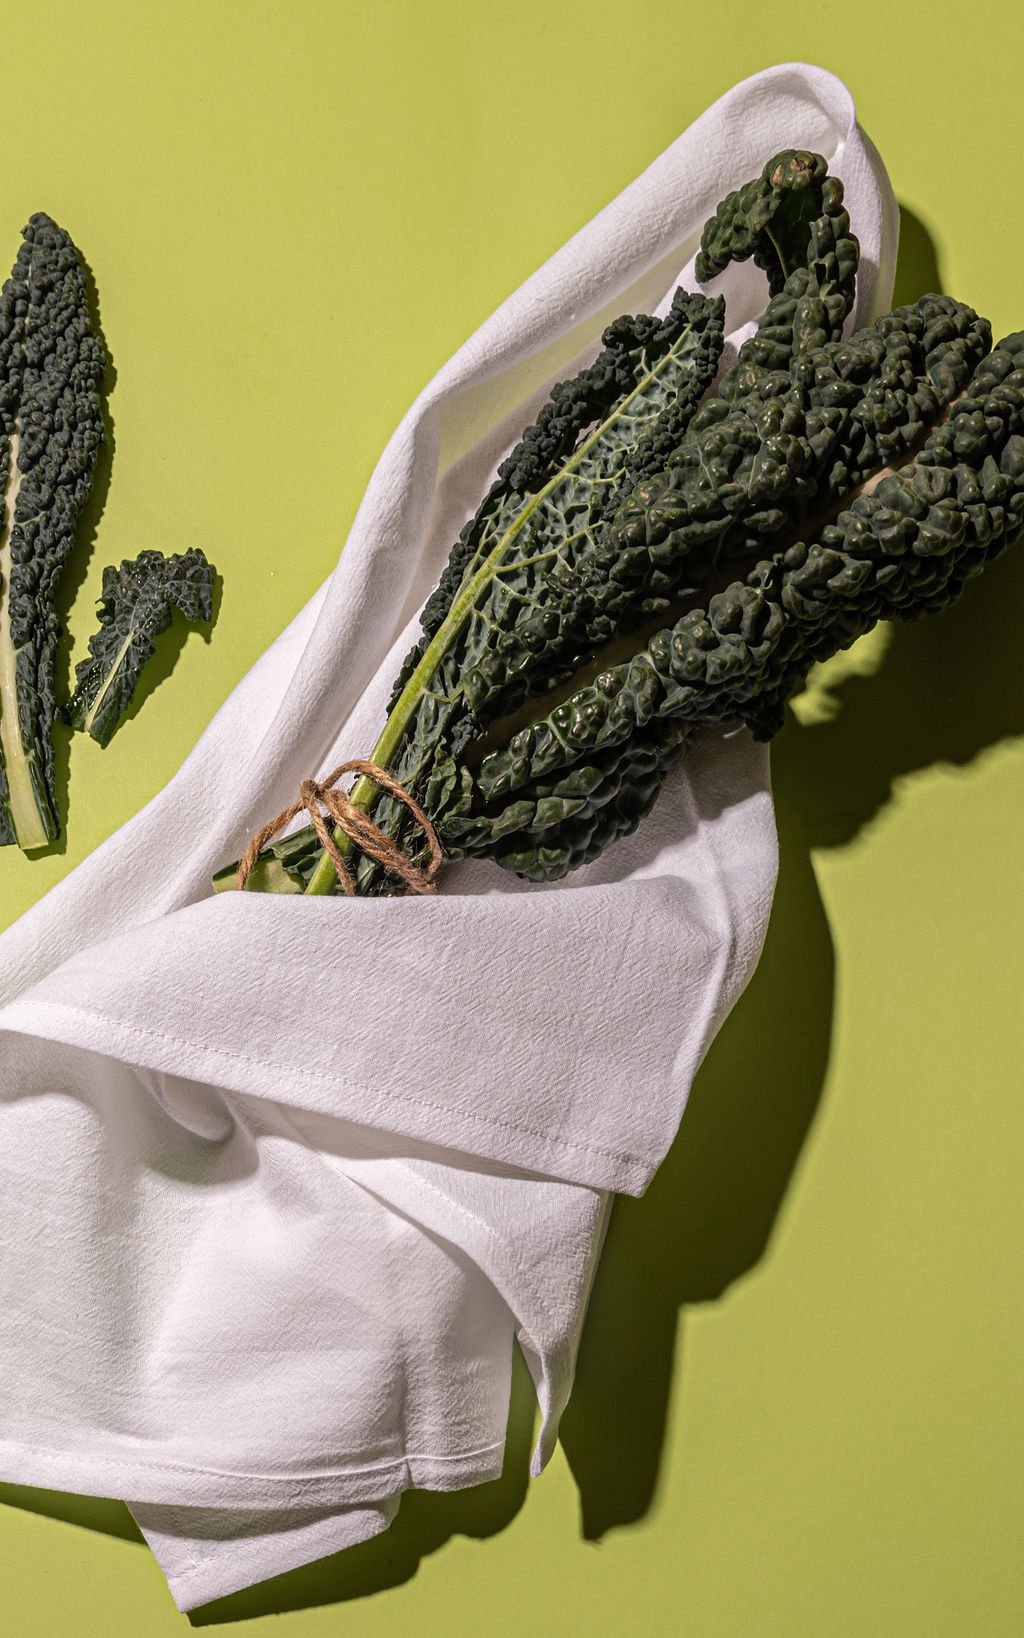 A bunch of kale wrapped in a white kitchen towel, branded ALT LINEN, placed on a kitchen countertop.